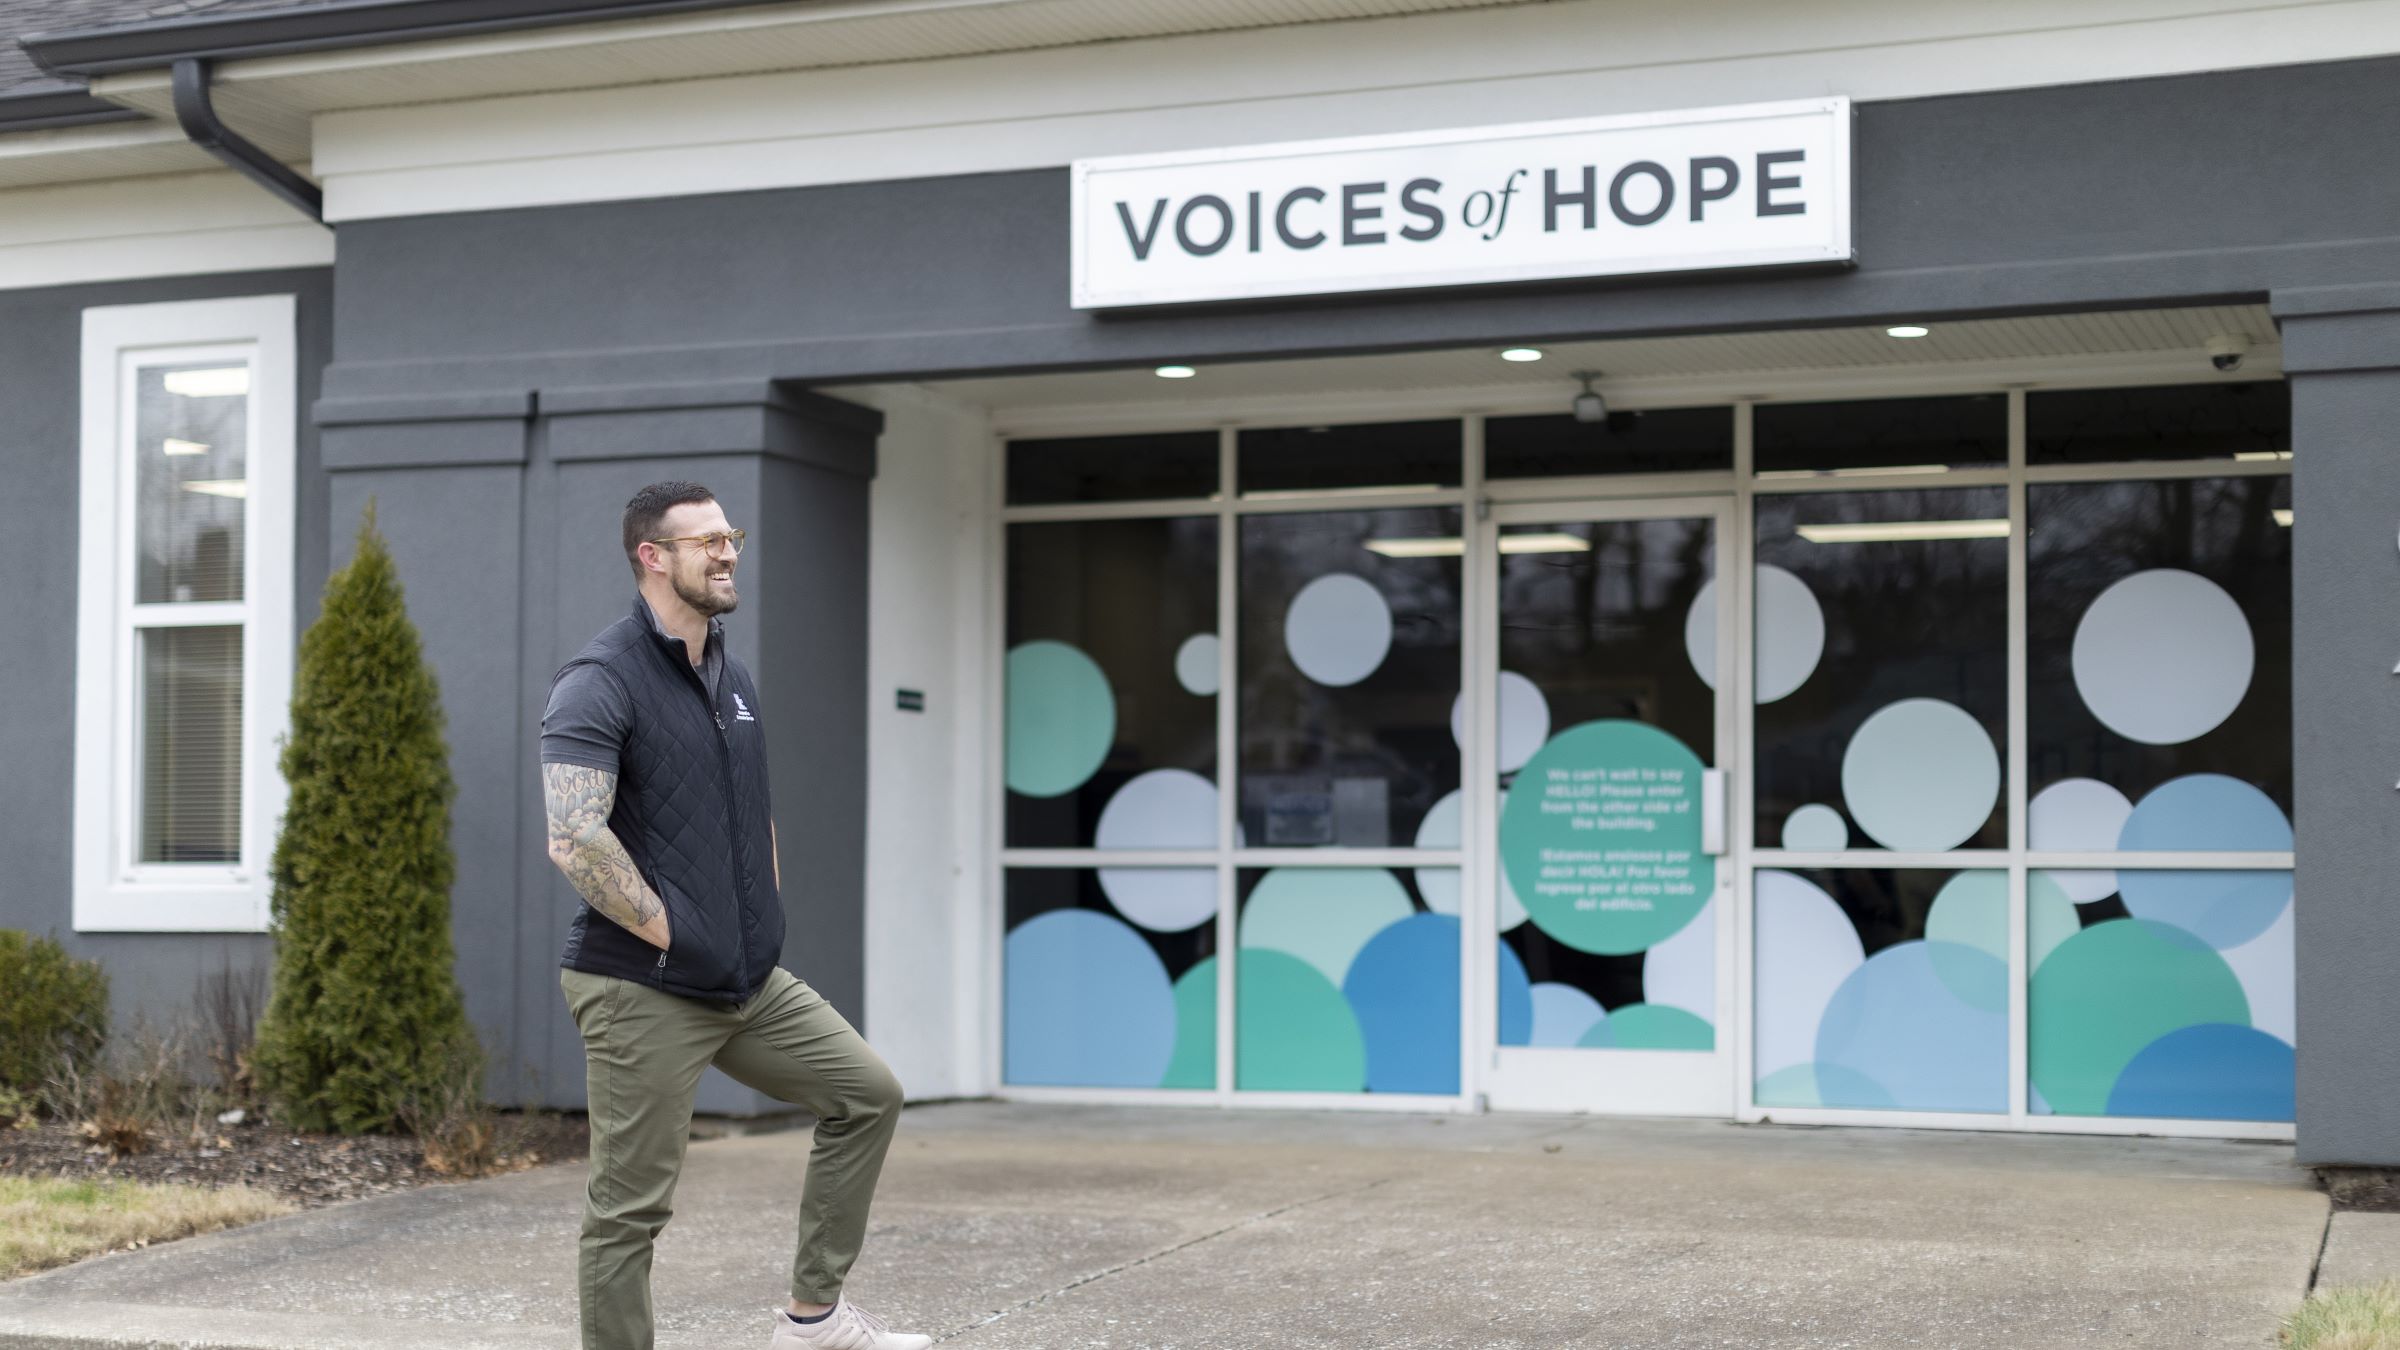 Alex Elswick is a founding member of Lexington’s Voices of Hope, a substance use disorder community center focused on research-based recovery treatment. Photo by Sabrina Hounshell.